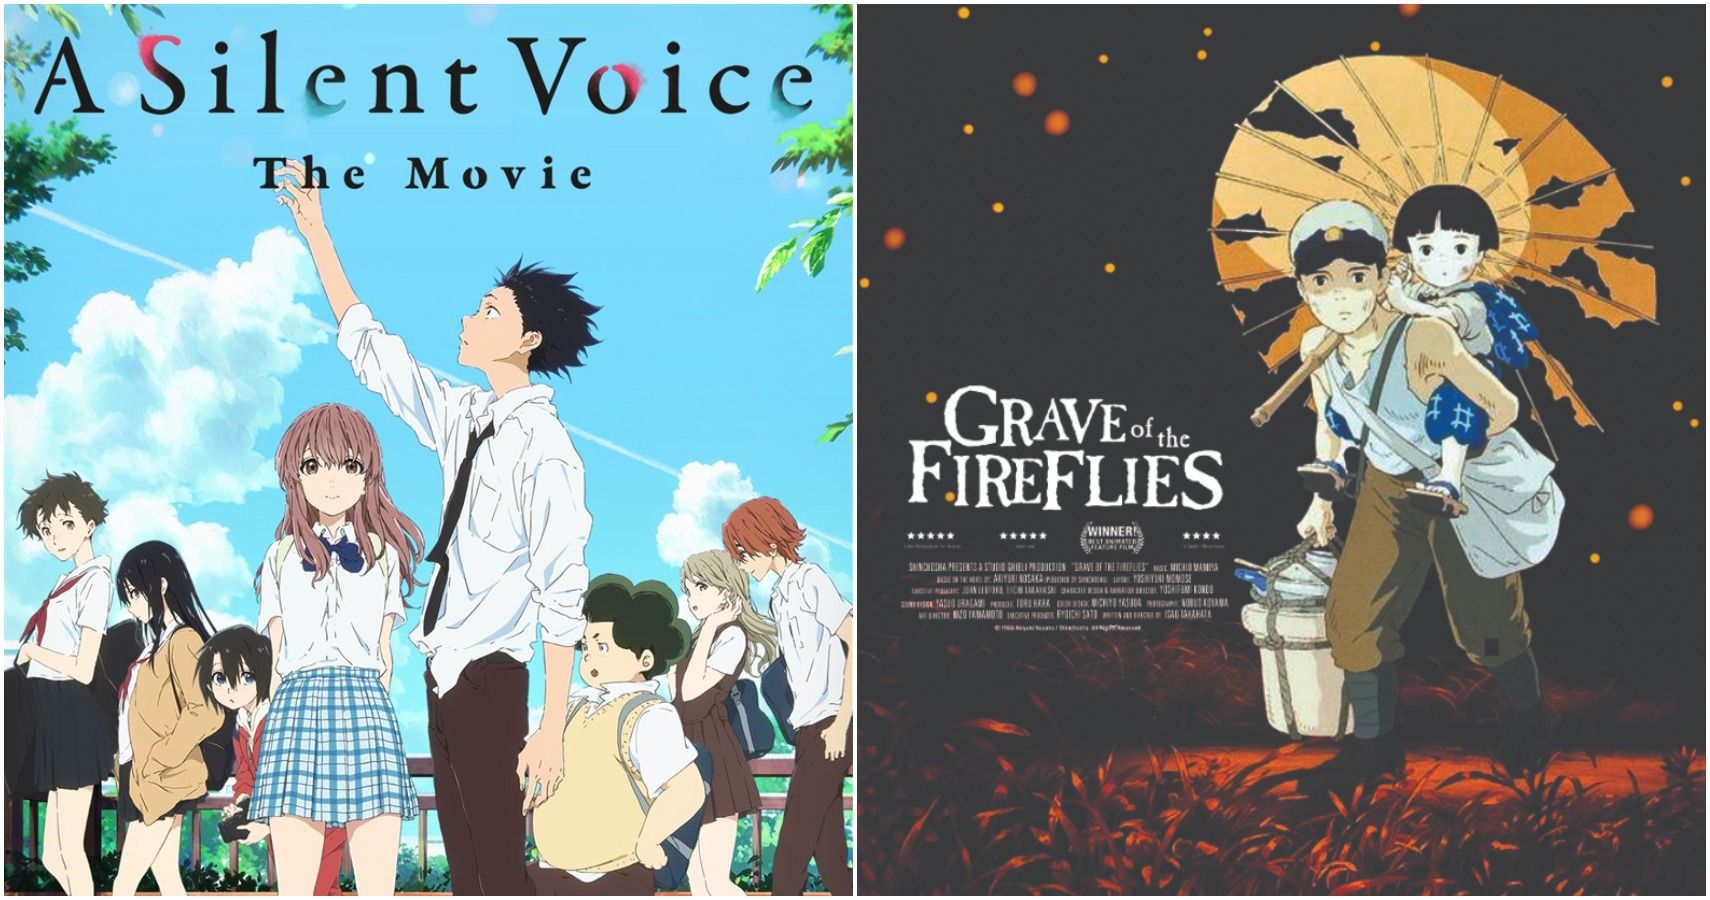 a silent voice full movie youtube eng sub